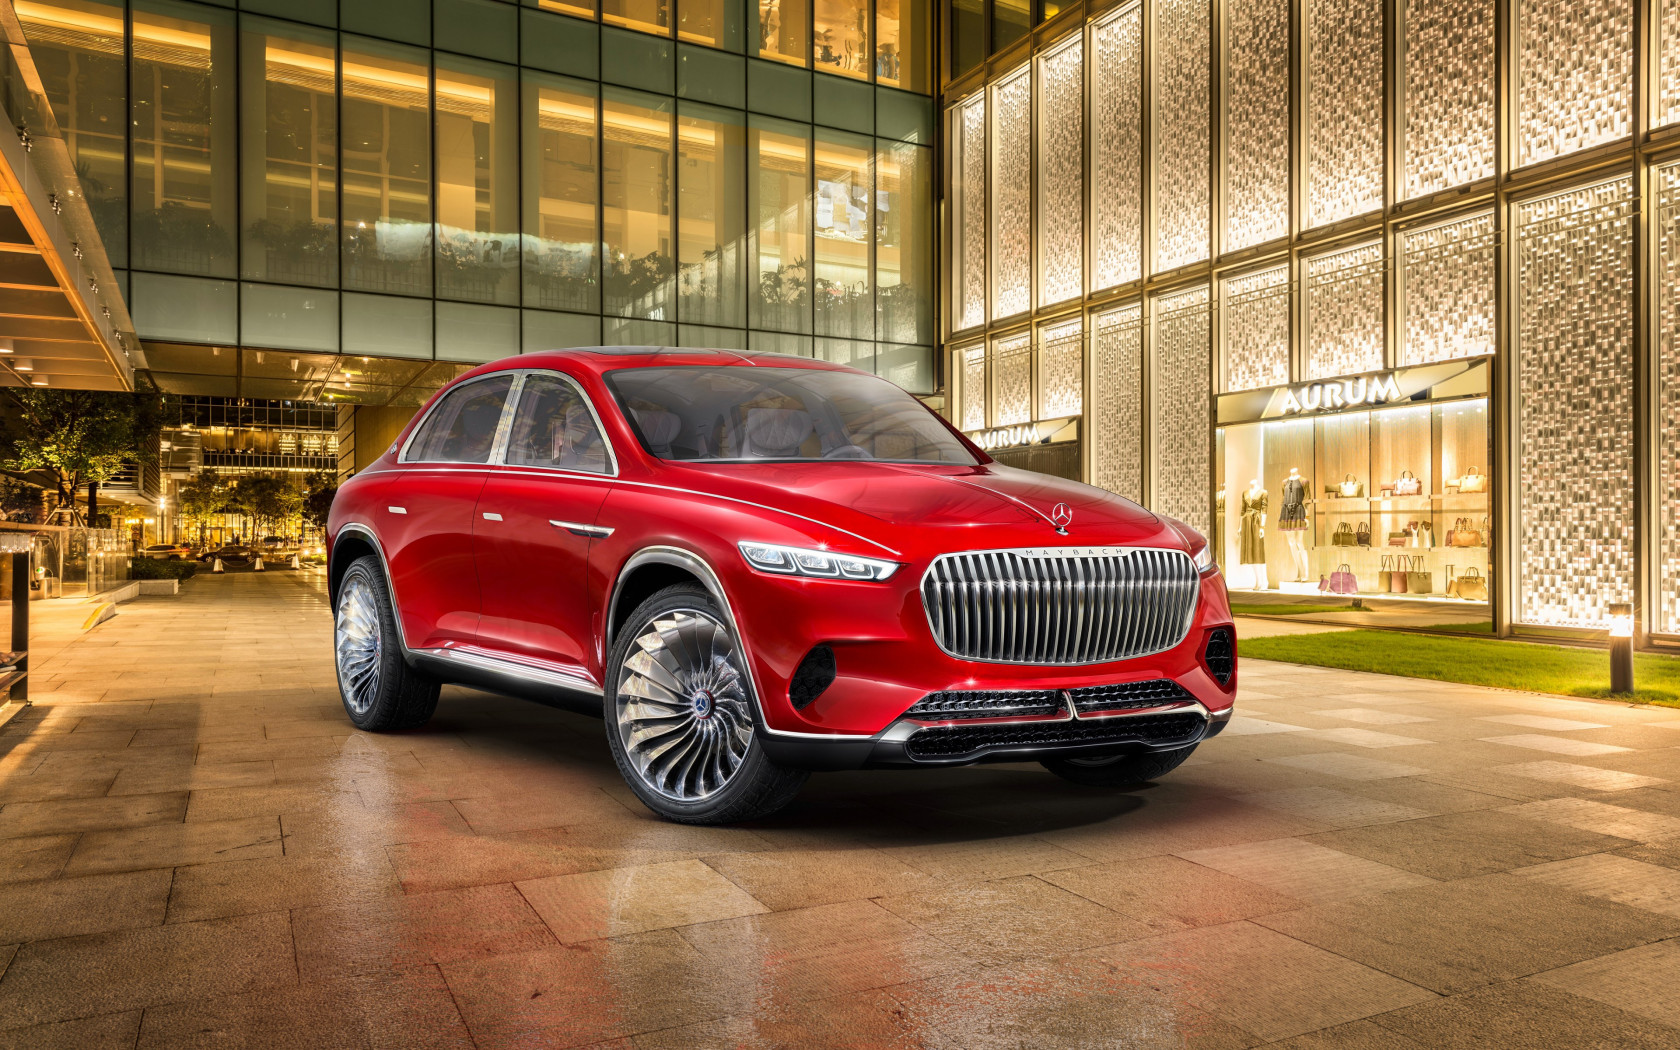 The Vision Mercedes Maybach Ultimate Luxury wallpaper 1680x1050